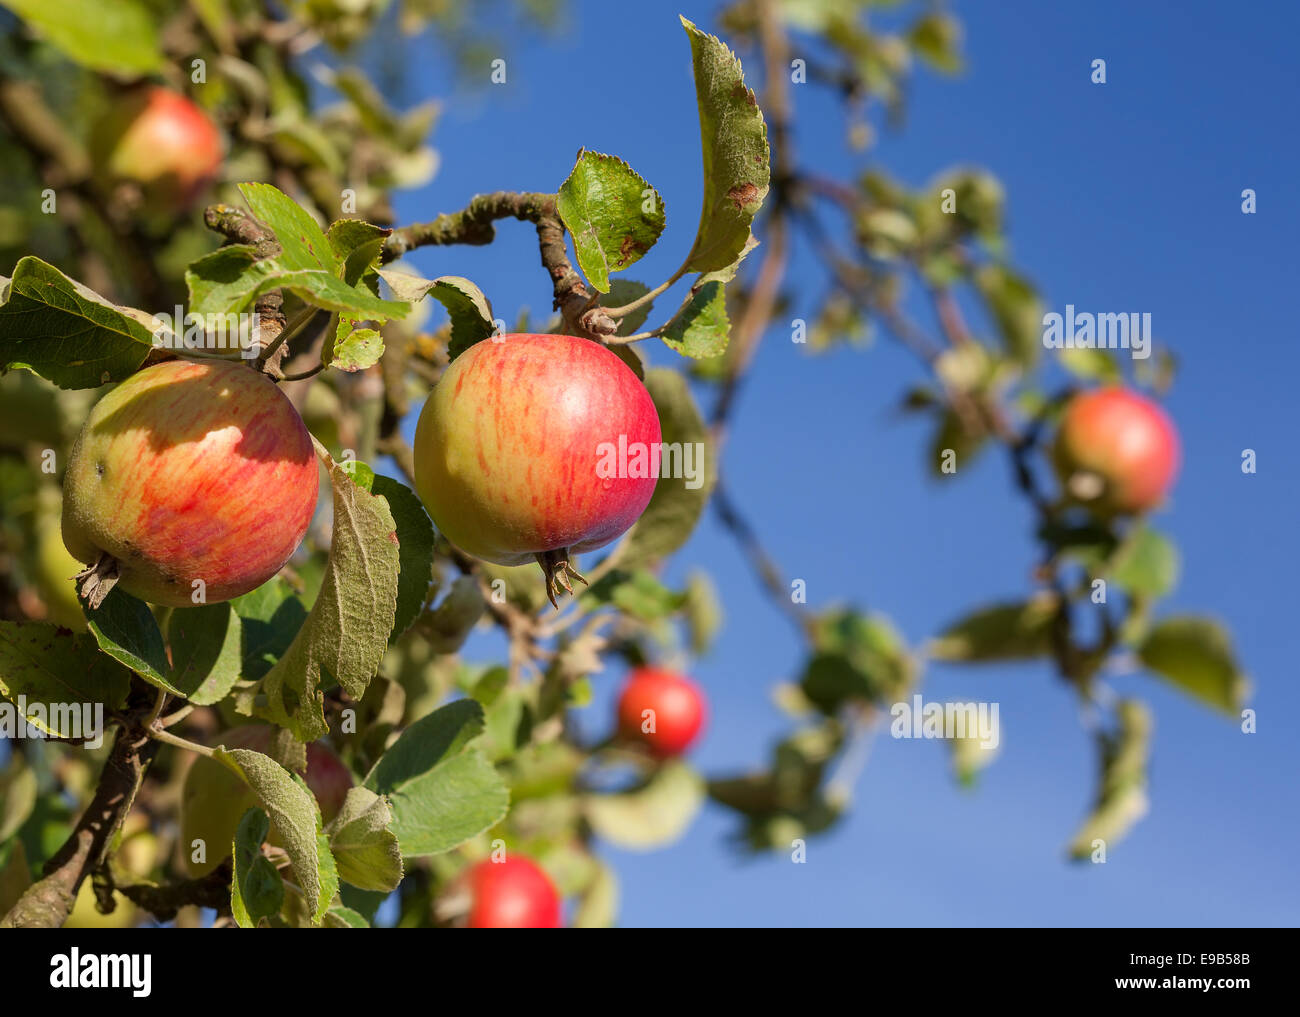 Red apples on apple tree branch against blue sky. Stock Photo